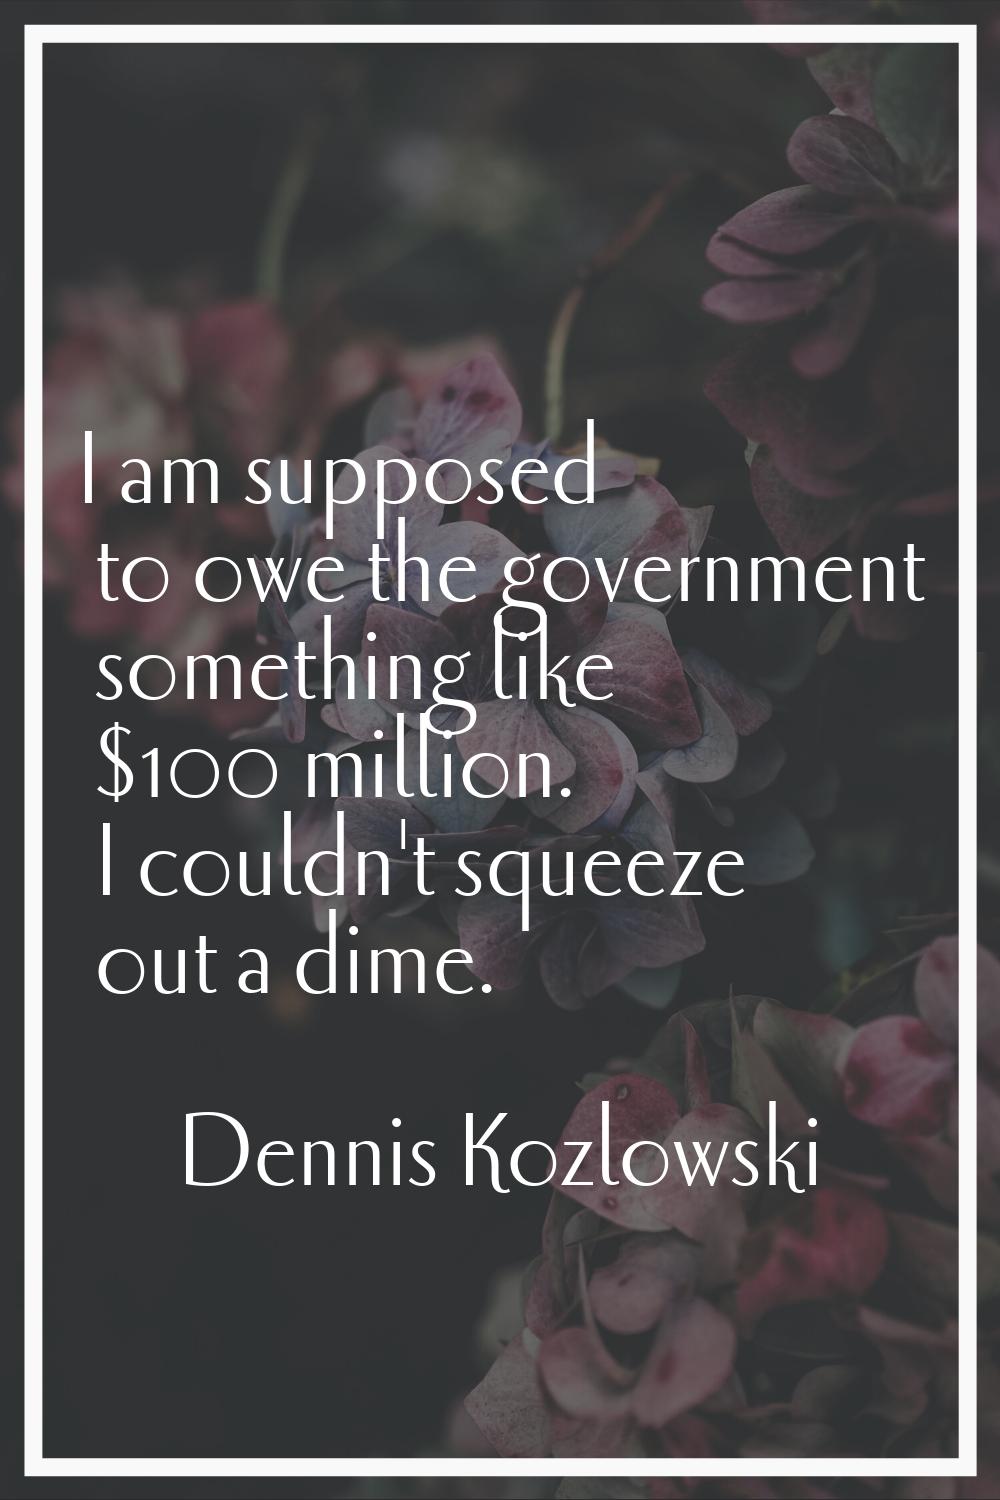 I am supposed to owe the government something like $100 million. I couldn't squeeze out a dime.